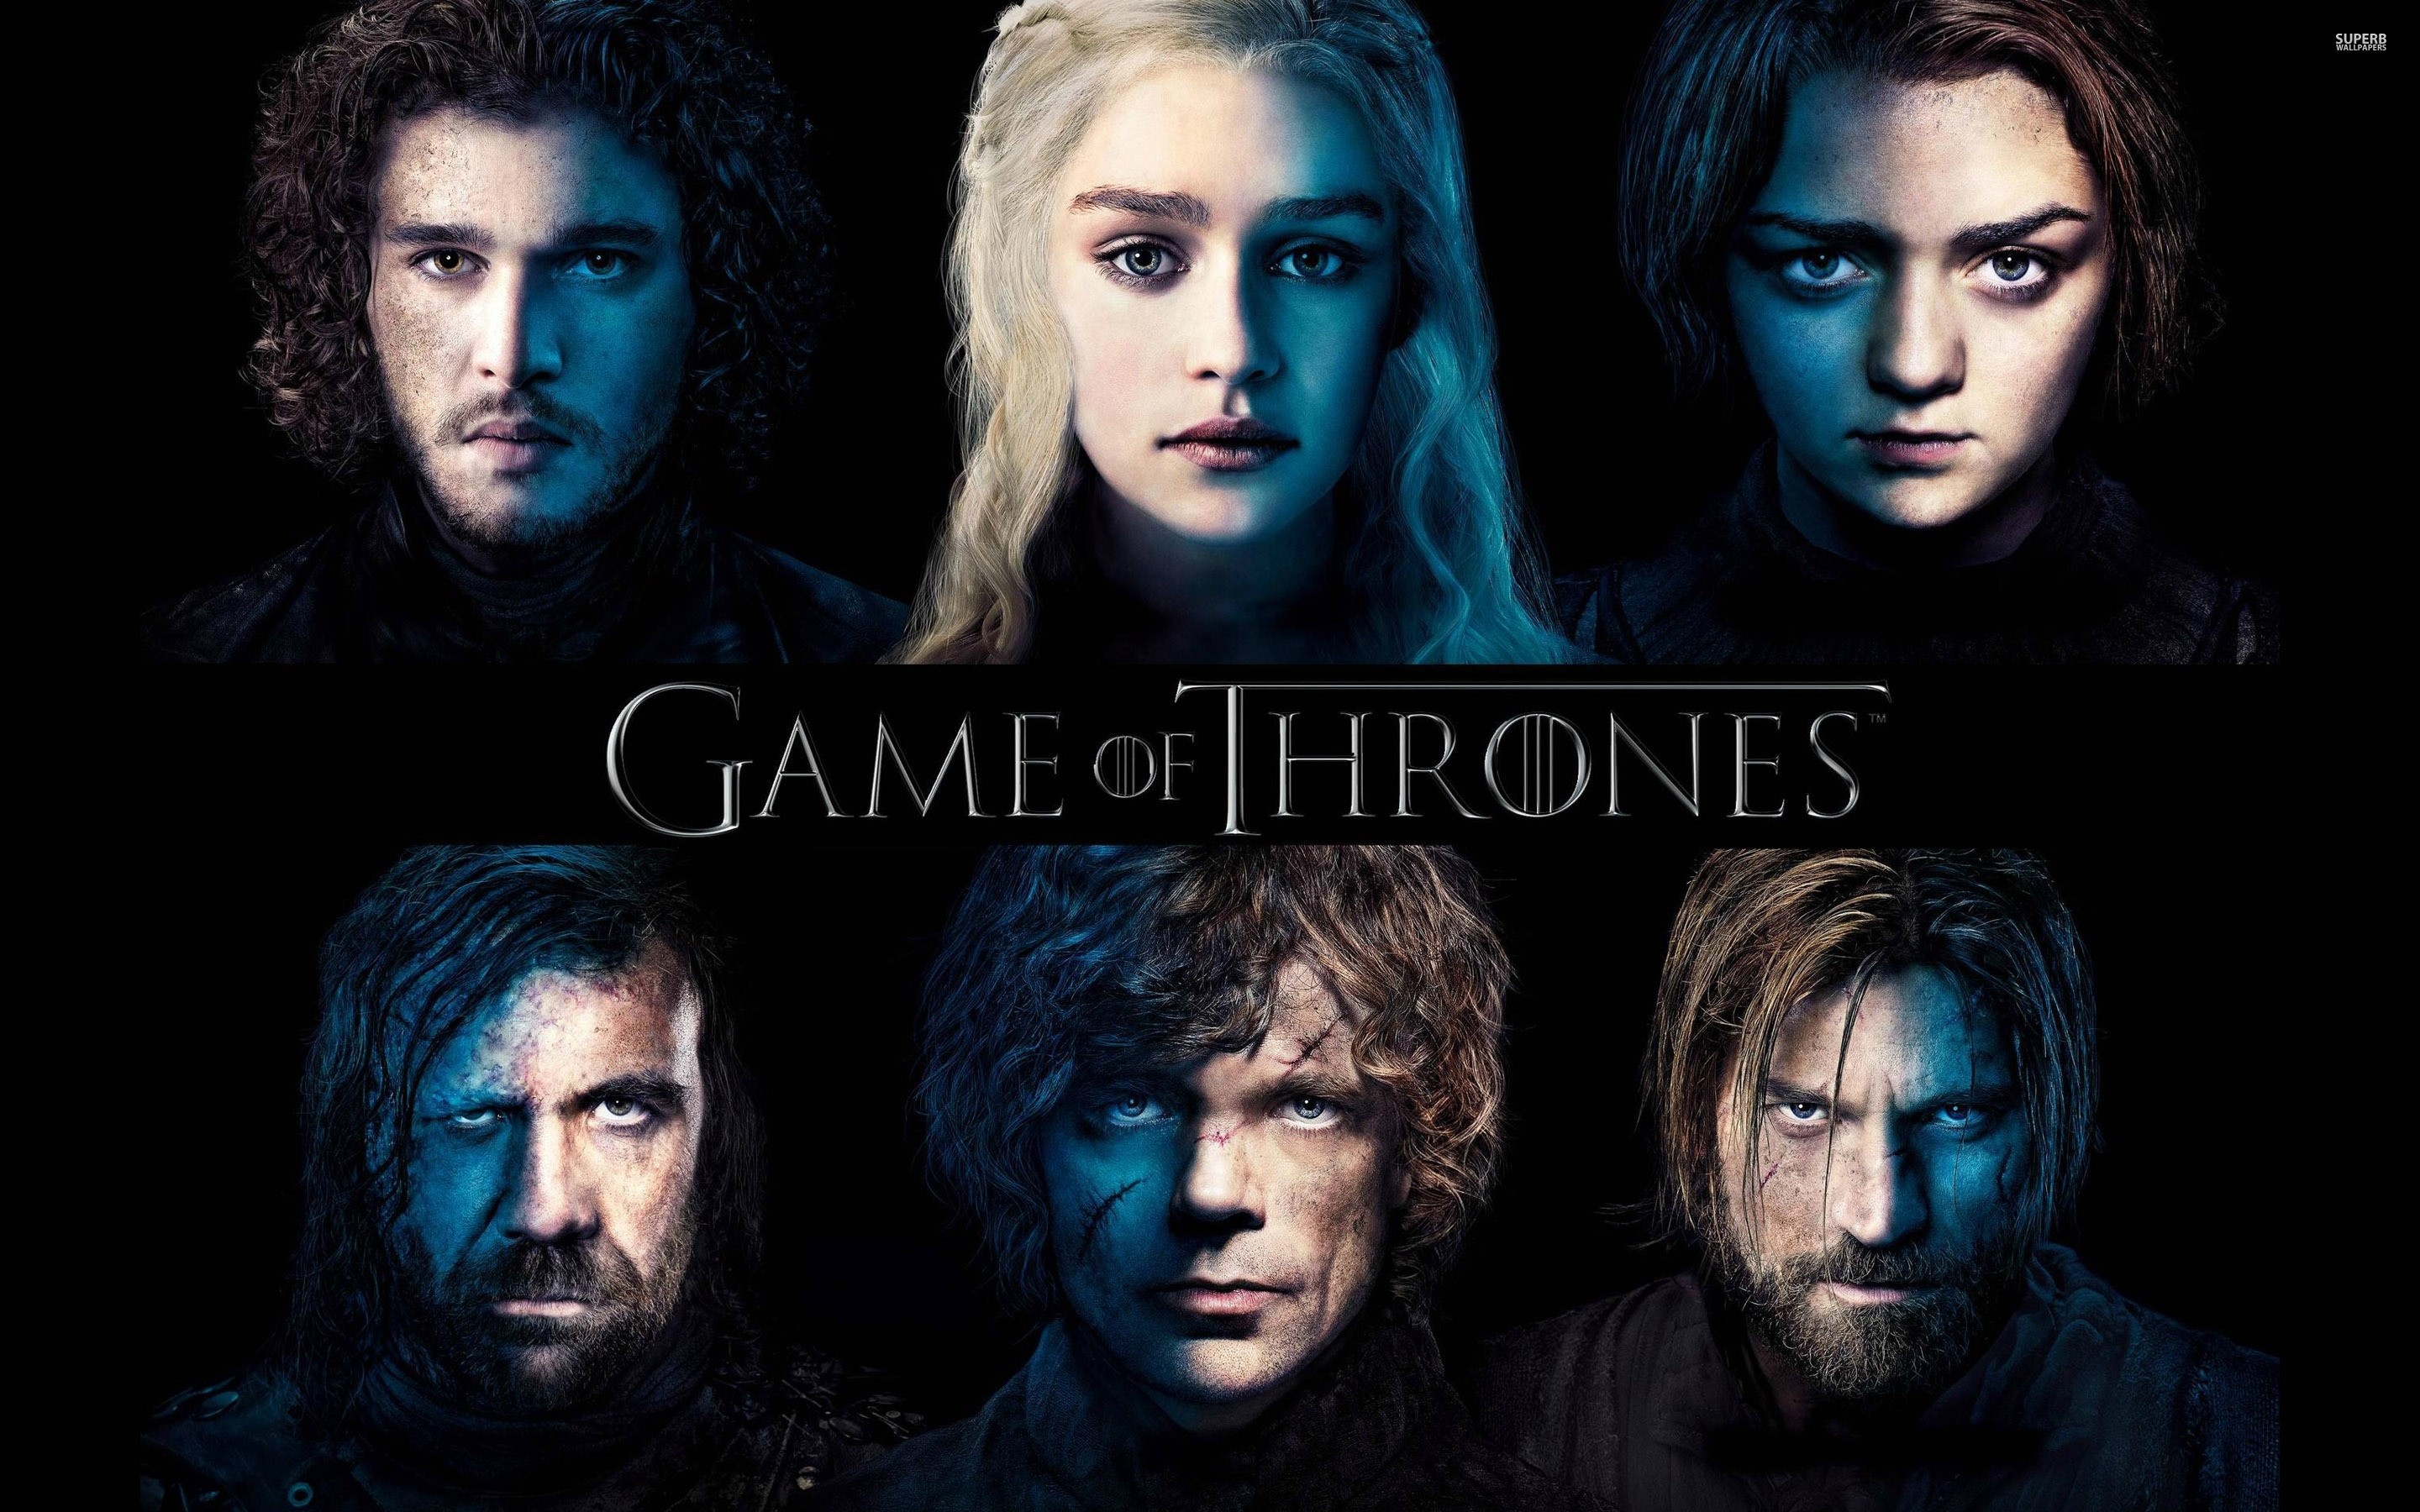 2880x1800 Game of Thrones, A "Game of Thrones" wallpaper.